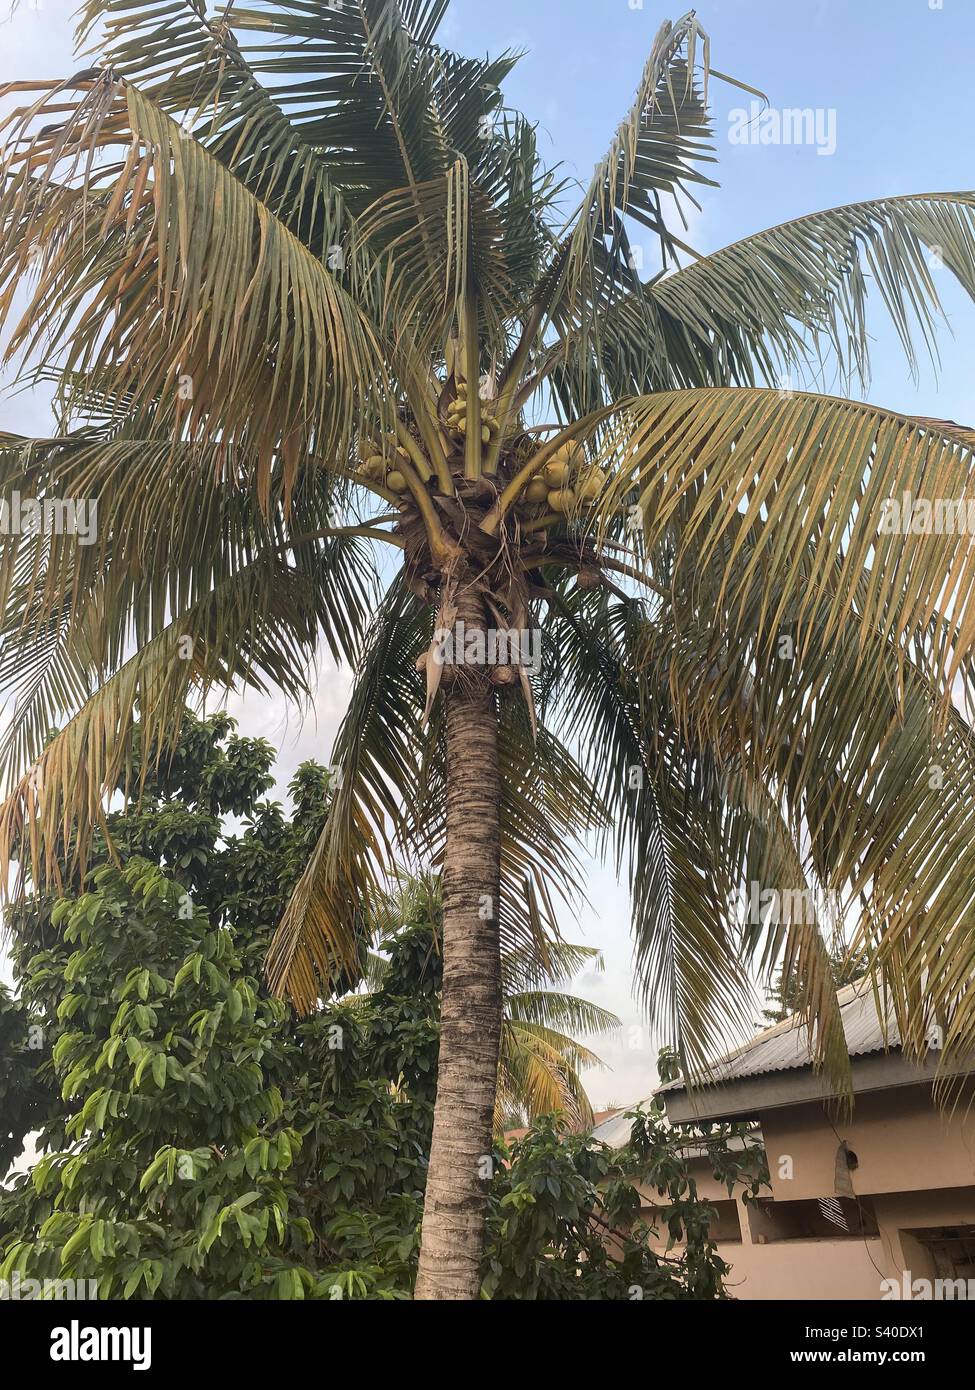 Palm tree with avocados over a compound house in Kumasi, Ghana (Ashanti), West Africa. Stock Photo